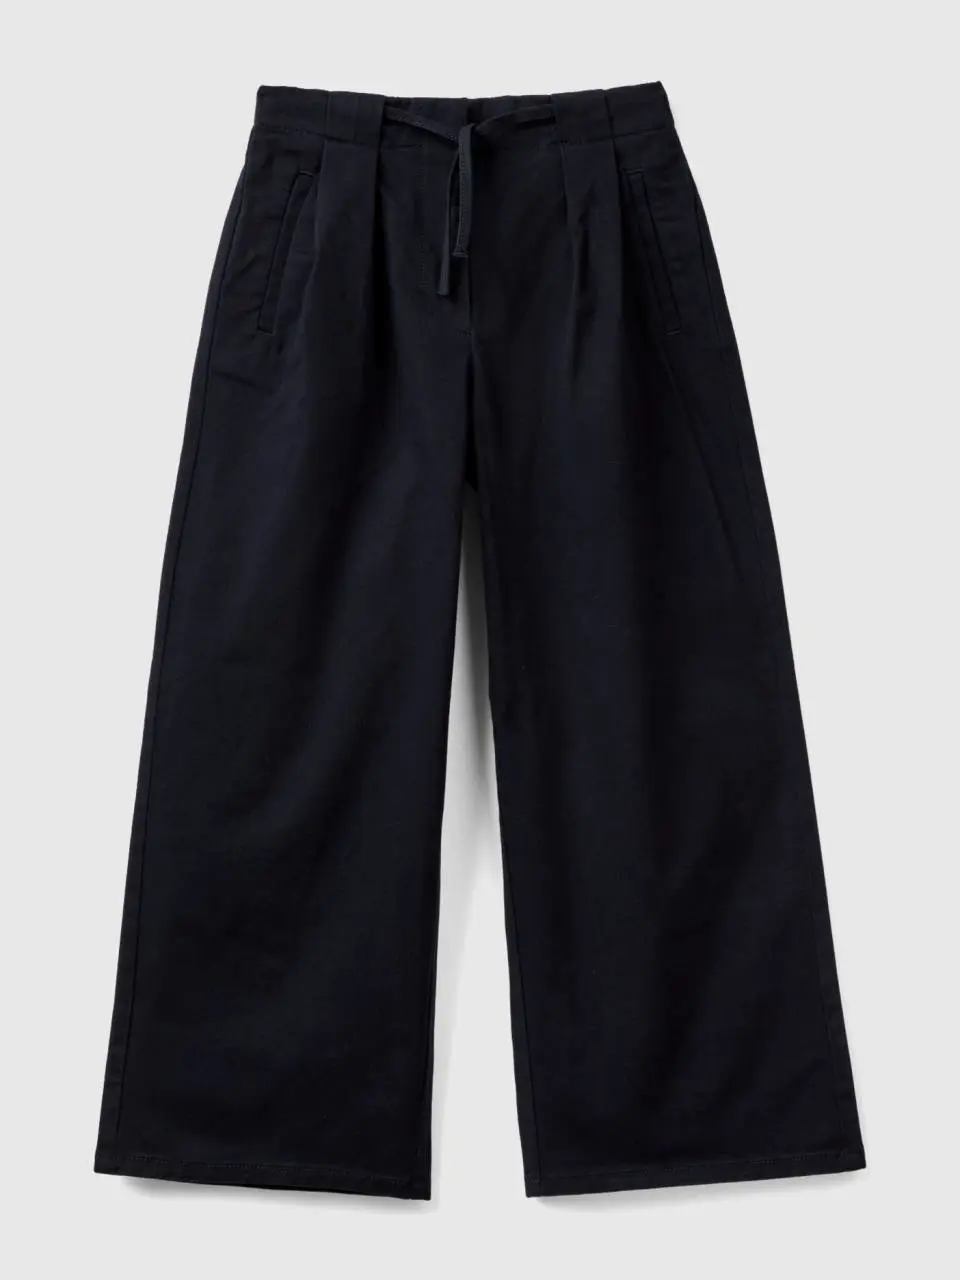 Benetton wide fit trousers in stretch cotton. 1